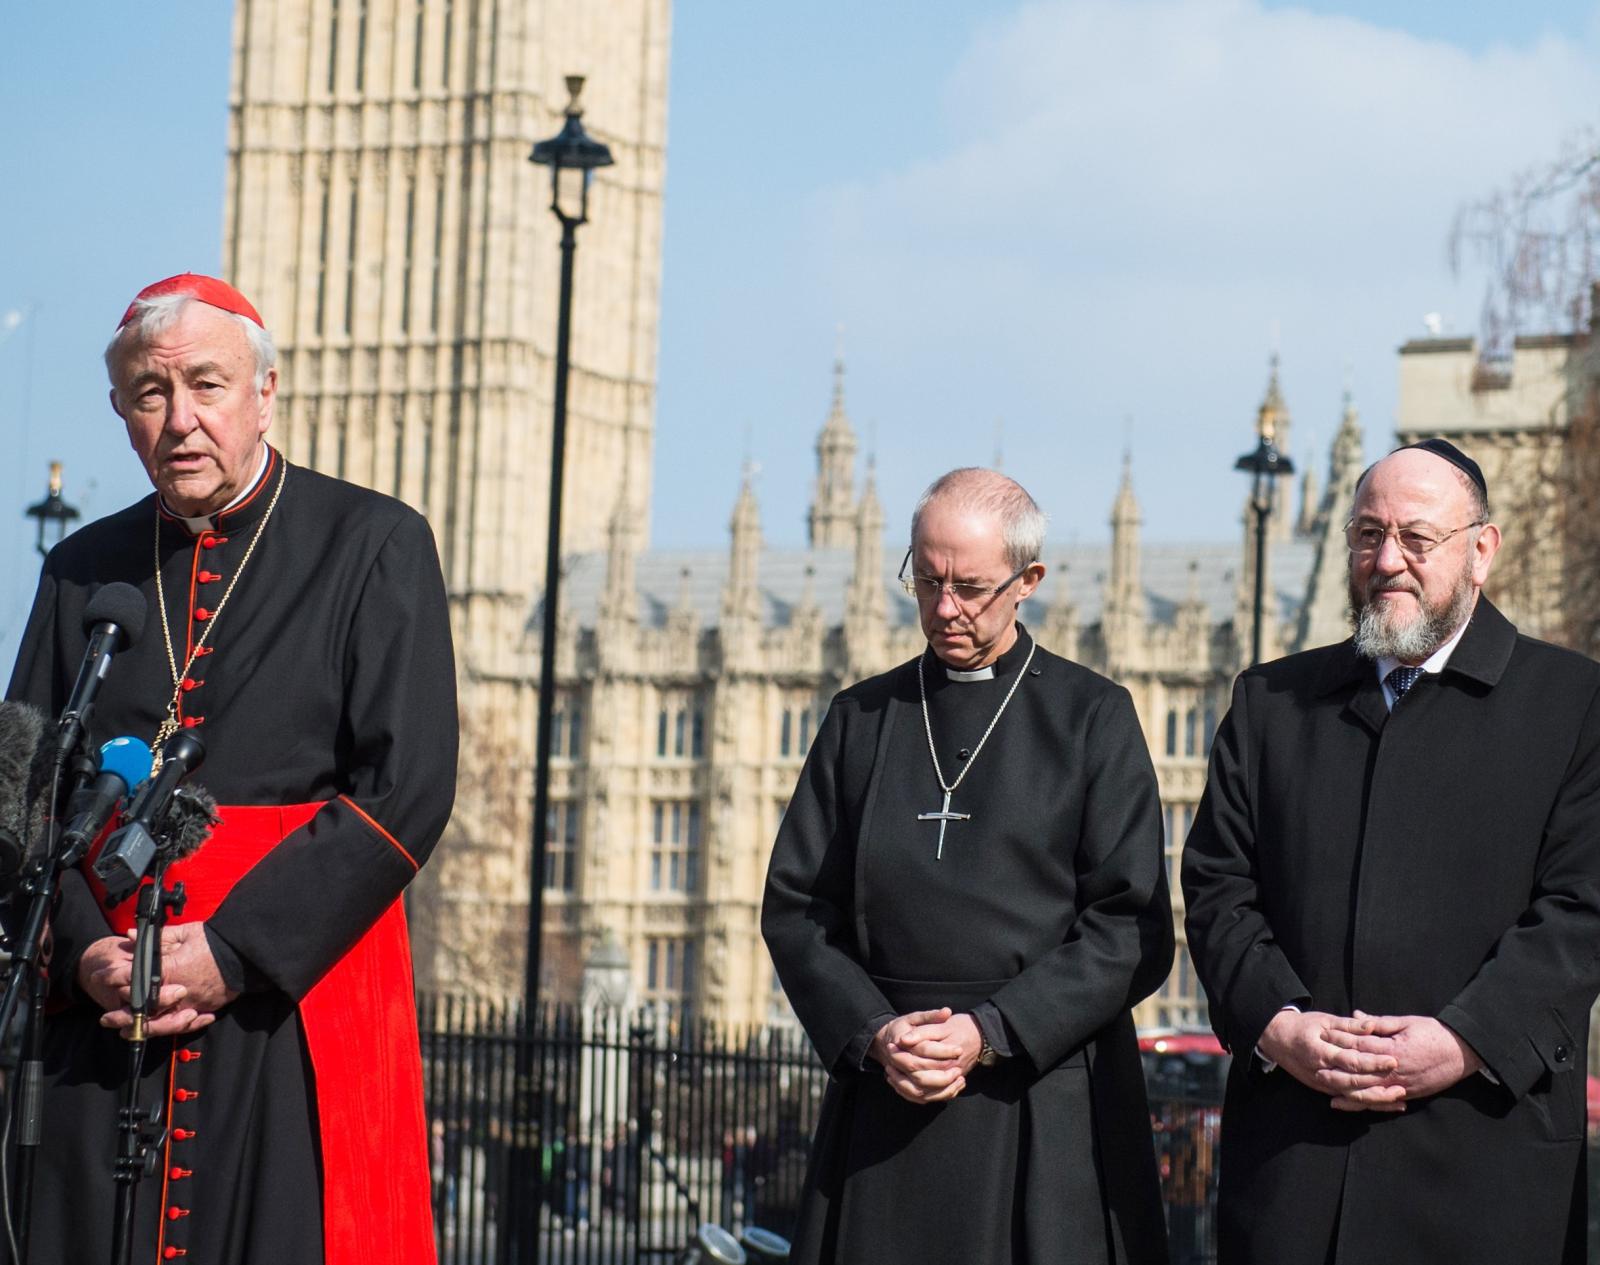 Faith leaders warn of risks of Assisted Dying bill to vulnerable - Diocese of Westminster